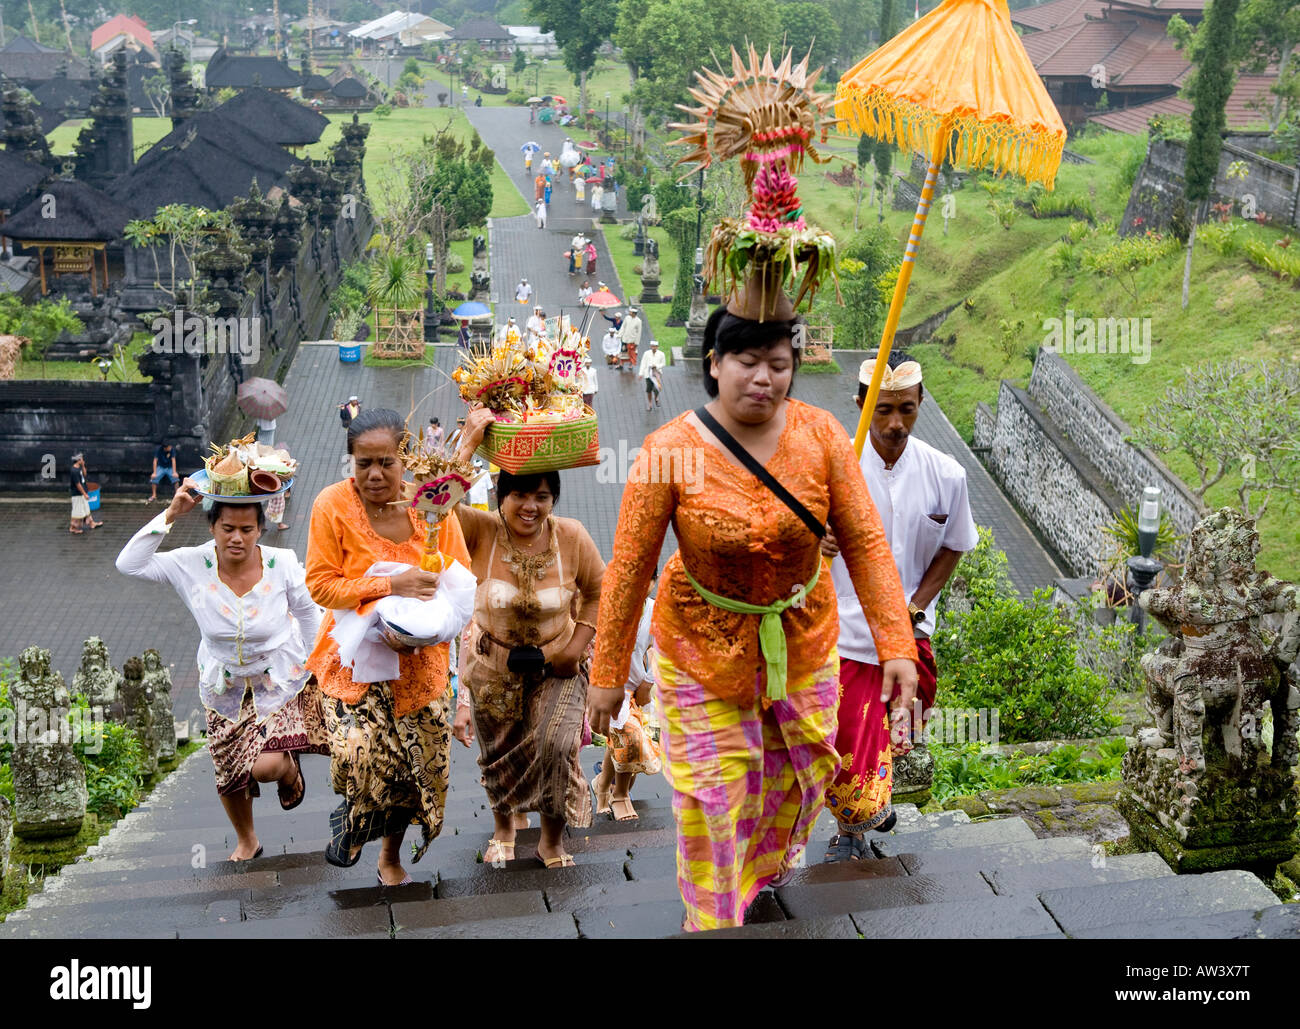 Balinese Funeral Procession Carrying Umbrellas and Votive offerings Climbing Steps Up To The Pura Besakih Temple Bali Indonesia Stock Photo